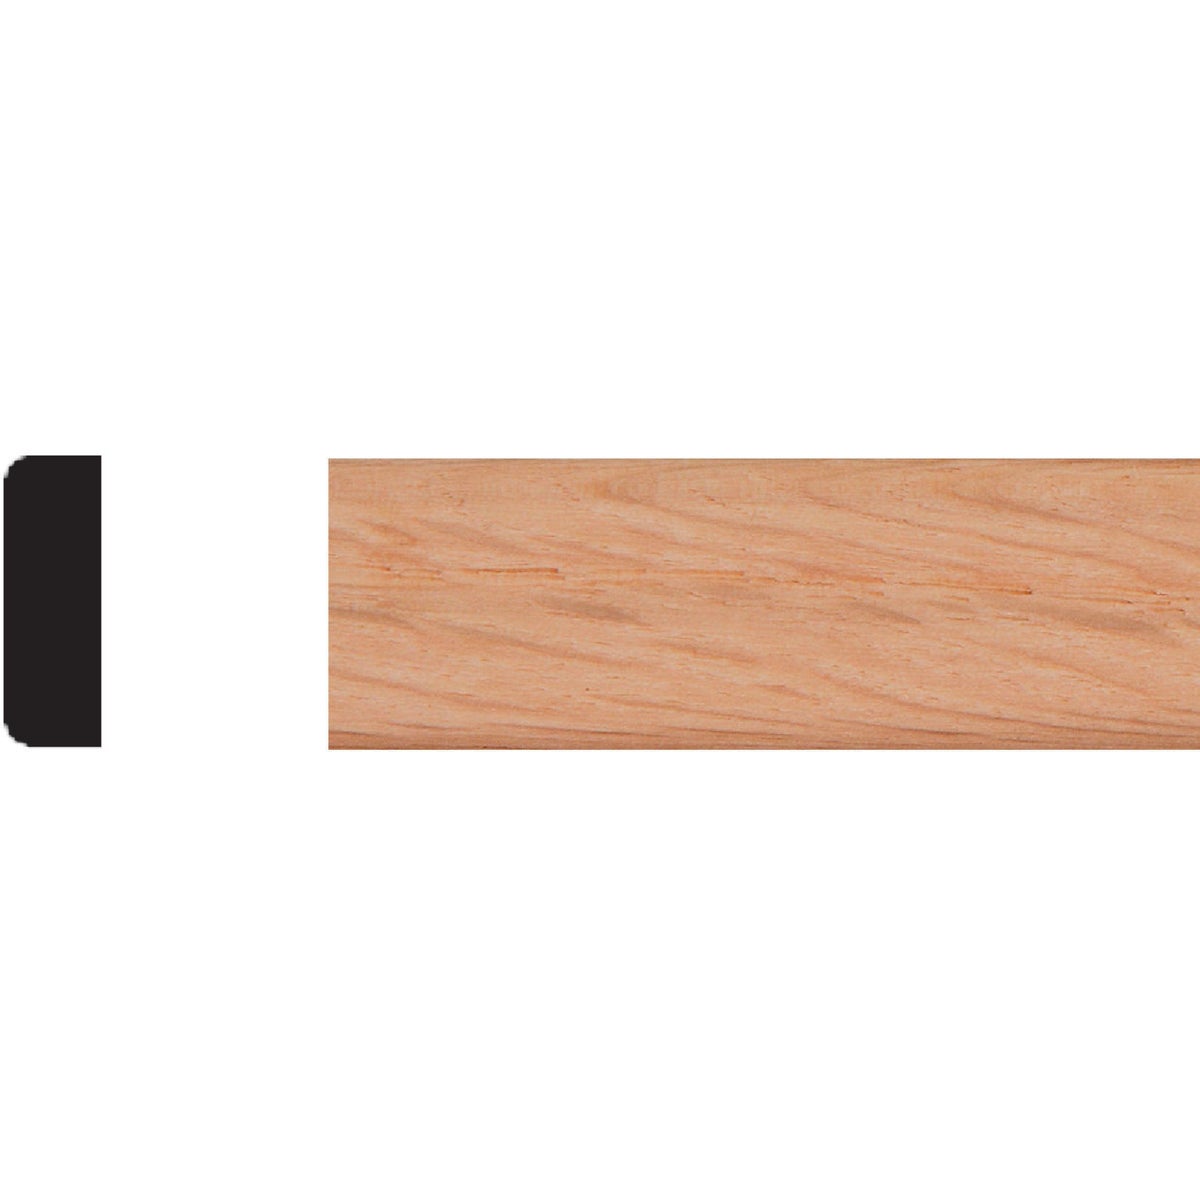 Item 181277, Red oak hardwood sanded smooth and ready-to-finish with stain or paint.